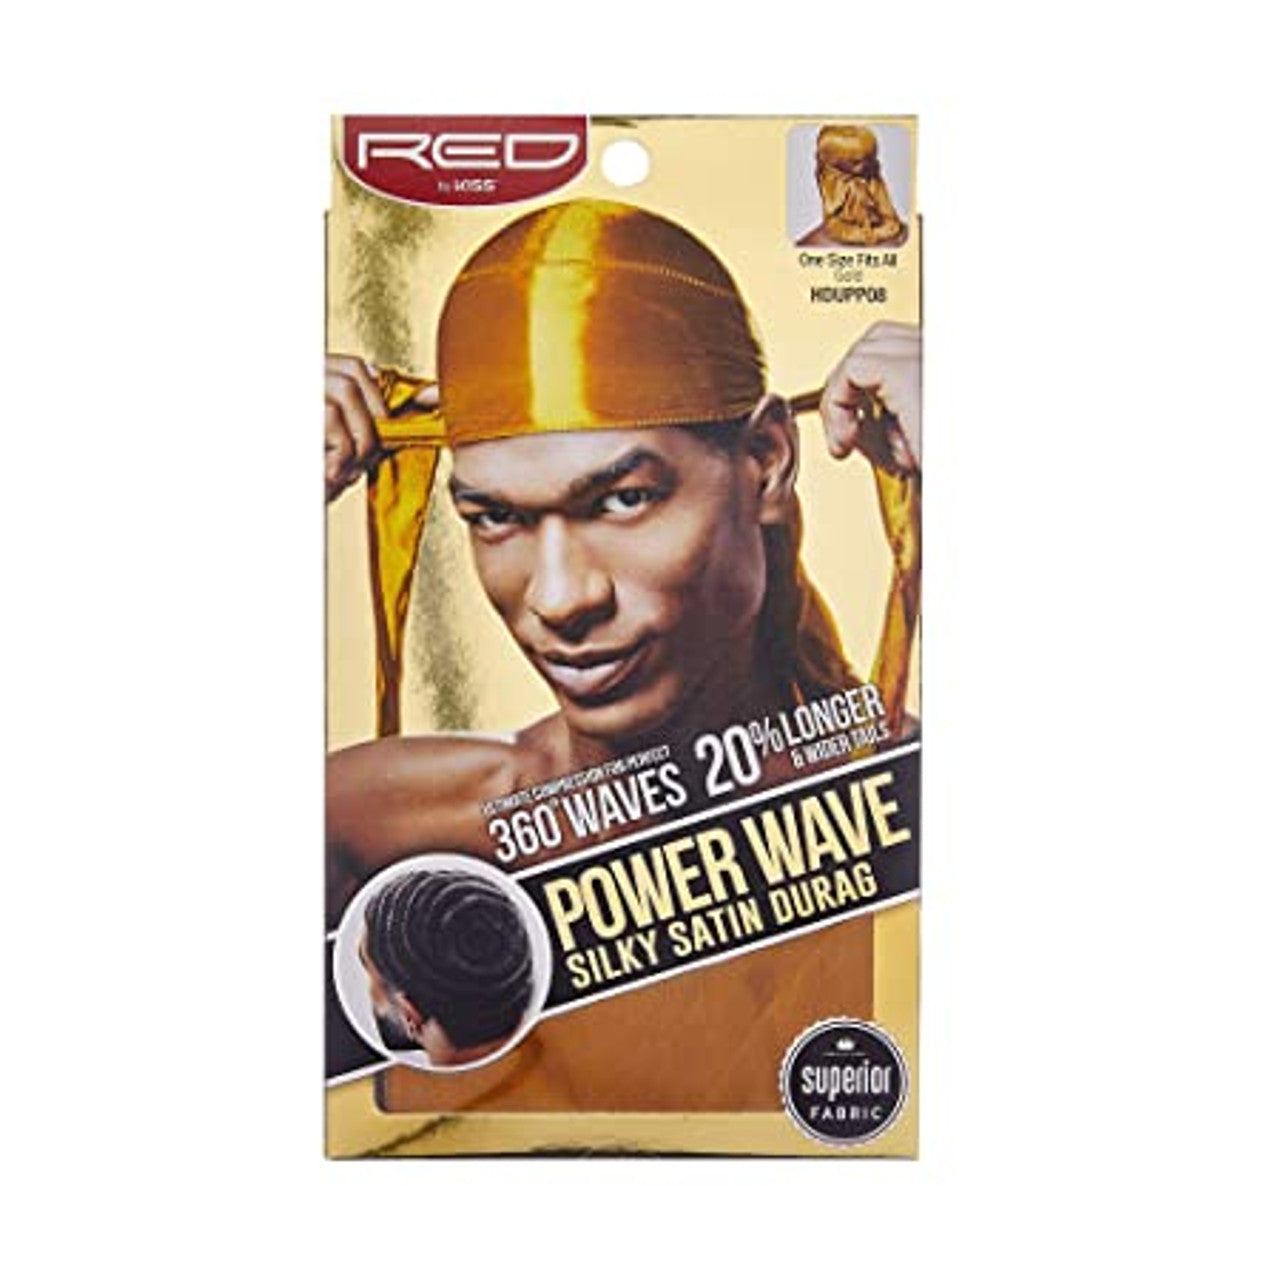 Red by Kiss Power Wave Silky Satin Durag - Gold - #HDUPP08